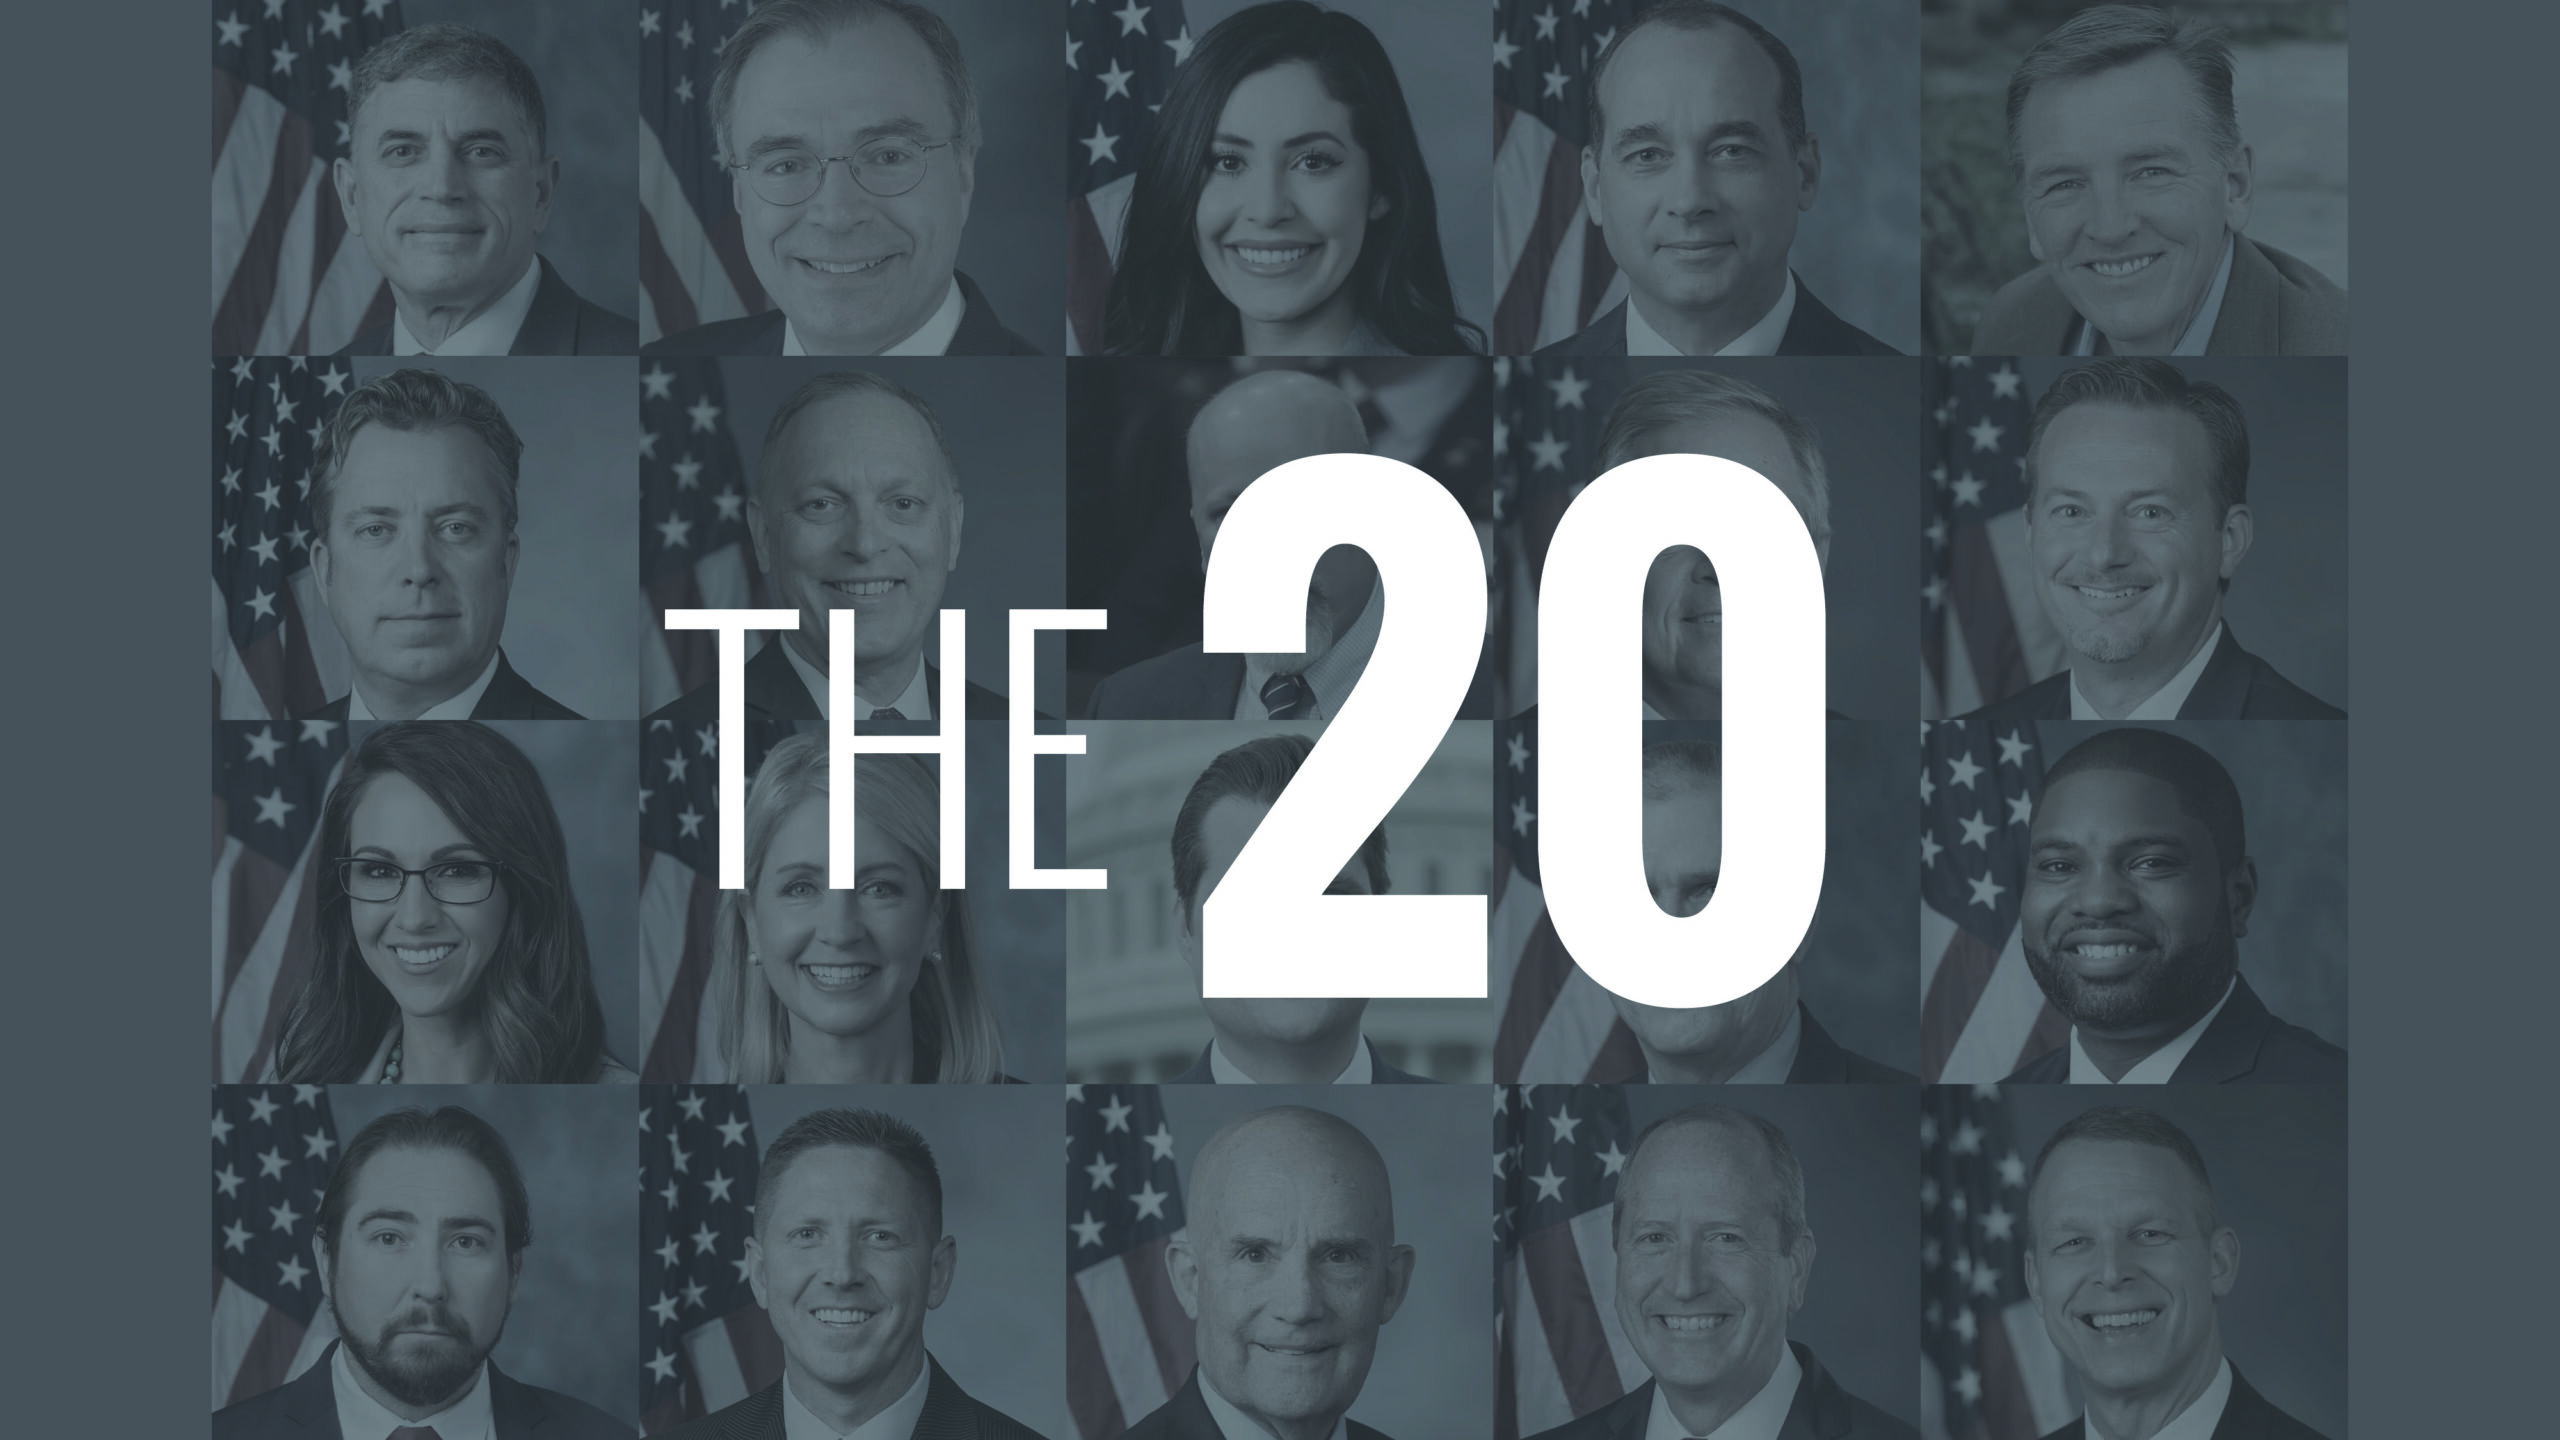 20 Lawmakers Stood Up to the Washington Establishment. This is Their Story.